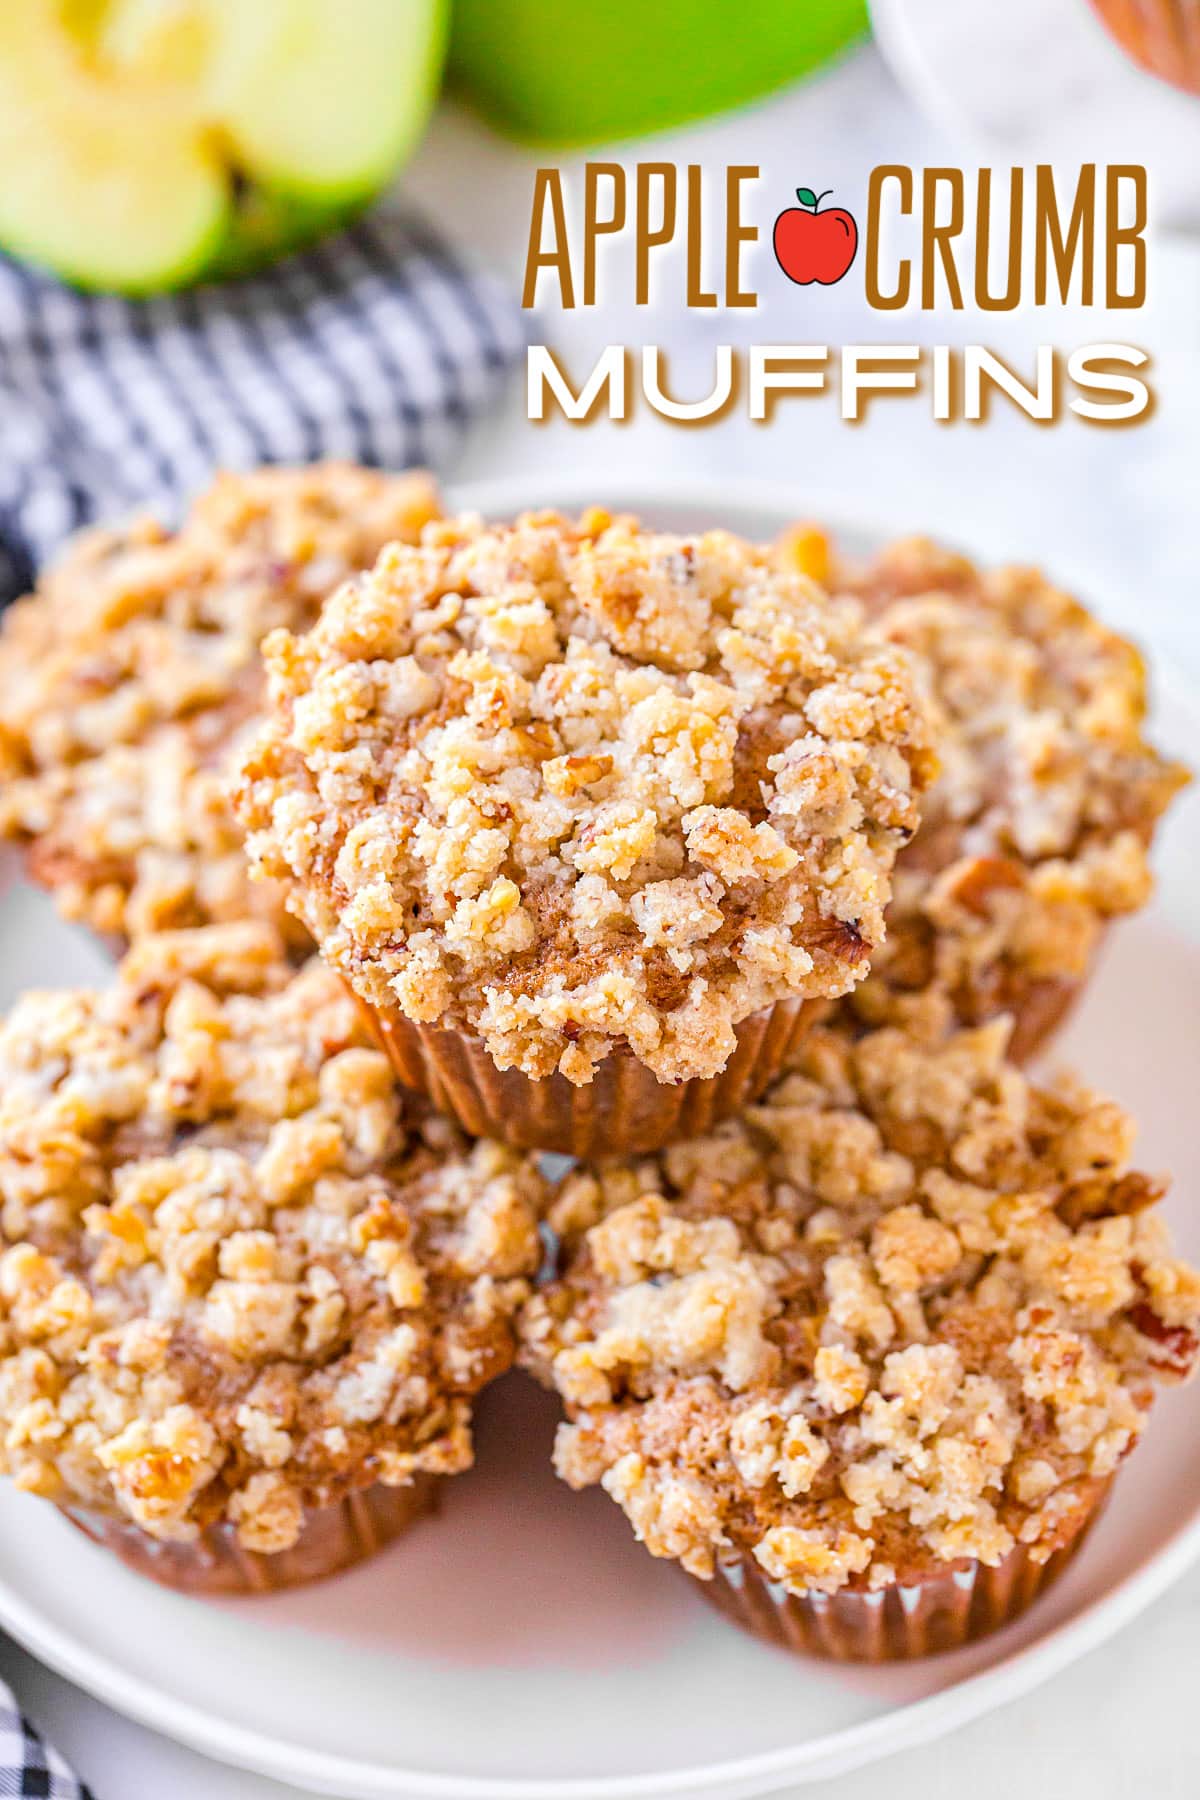 five apple crumb muffins on white plate with blue and white napkin beneath plate and text overlay at top